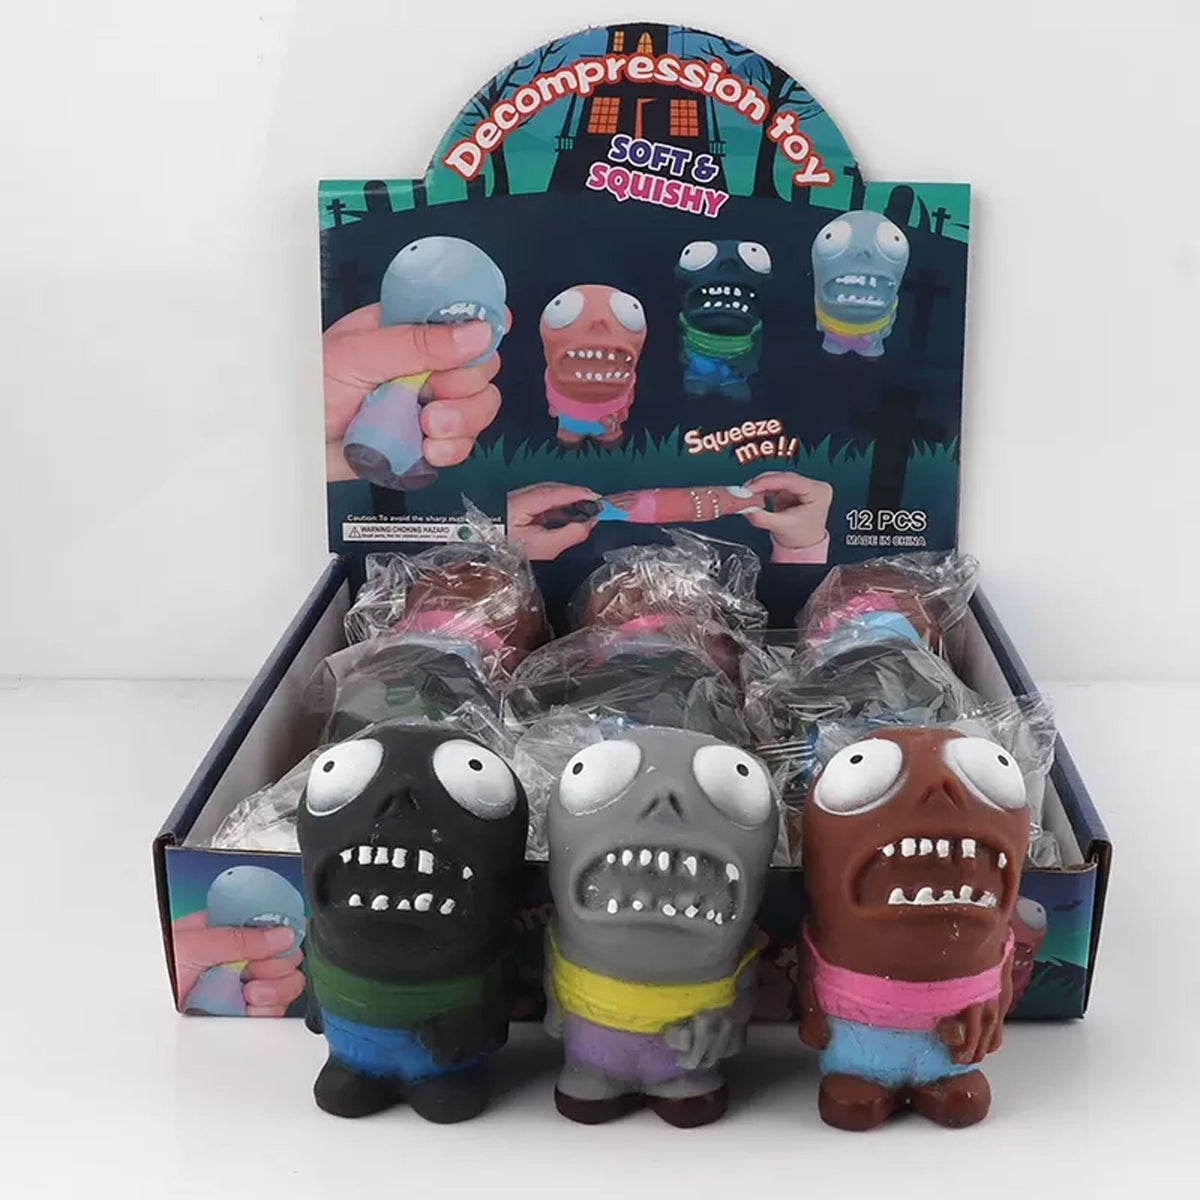 New Zombie Style Squishy Toy - Satisfying and Fun Stress Relief Toy for Kids and Adults